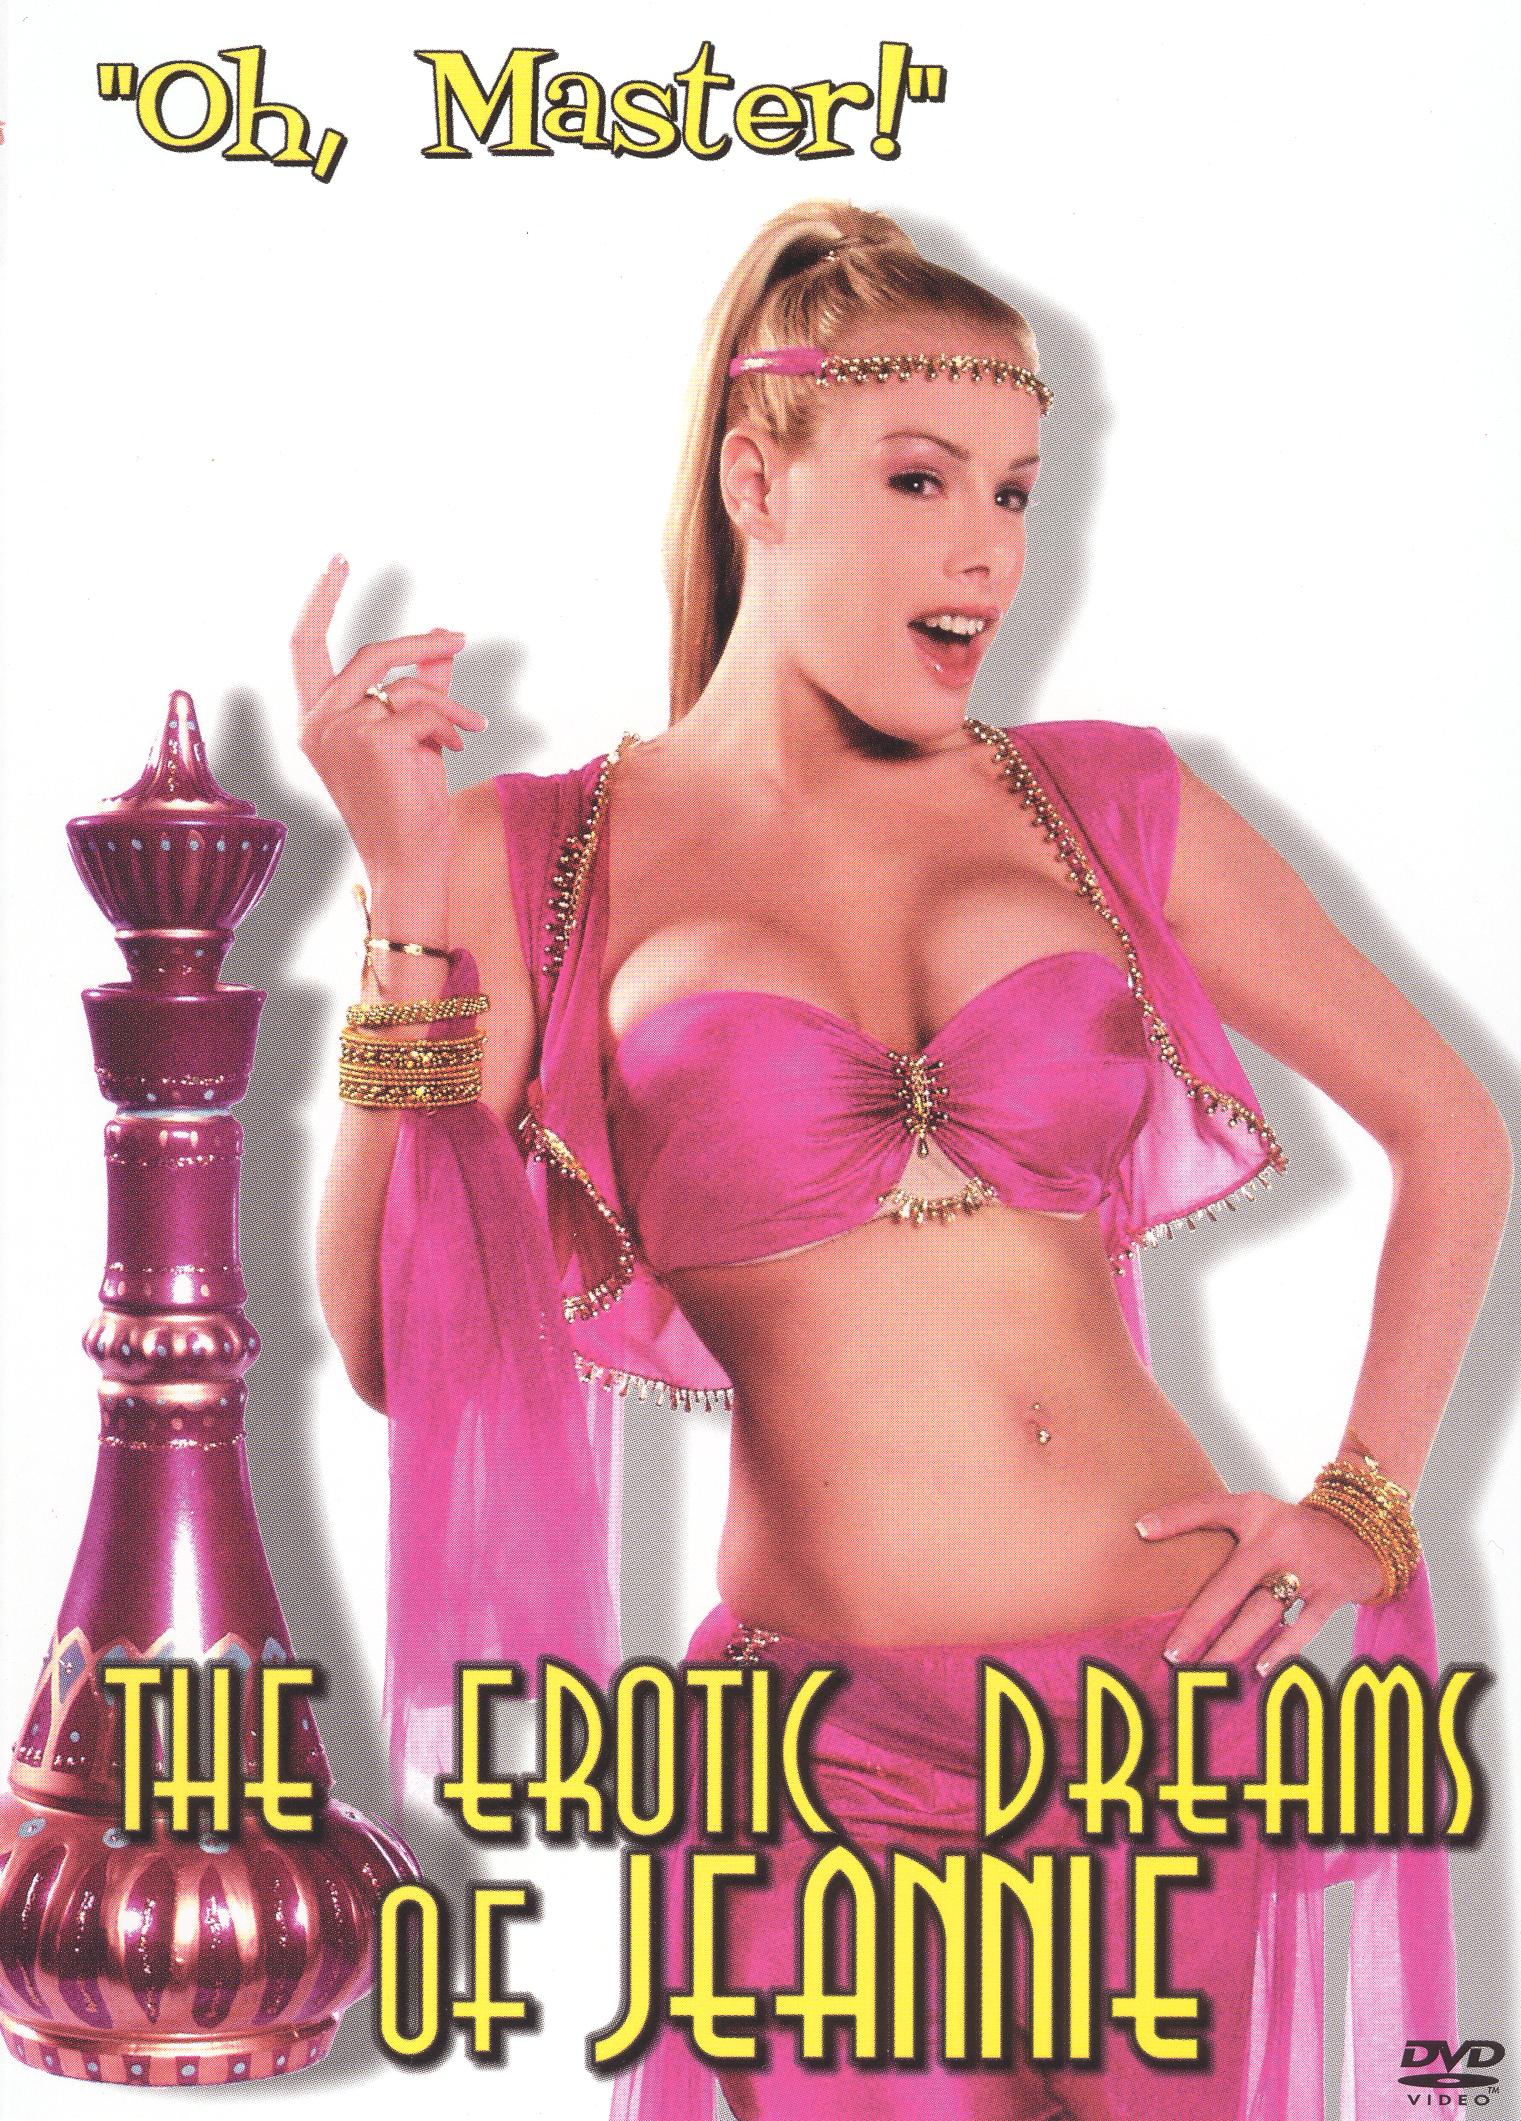 The Erotic Dreams Of Jeannie 2004 Synopsis